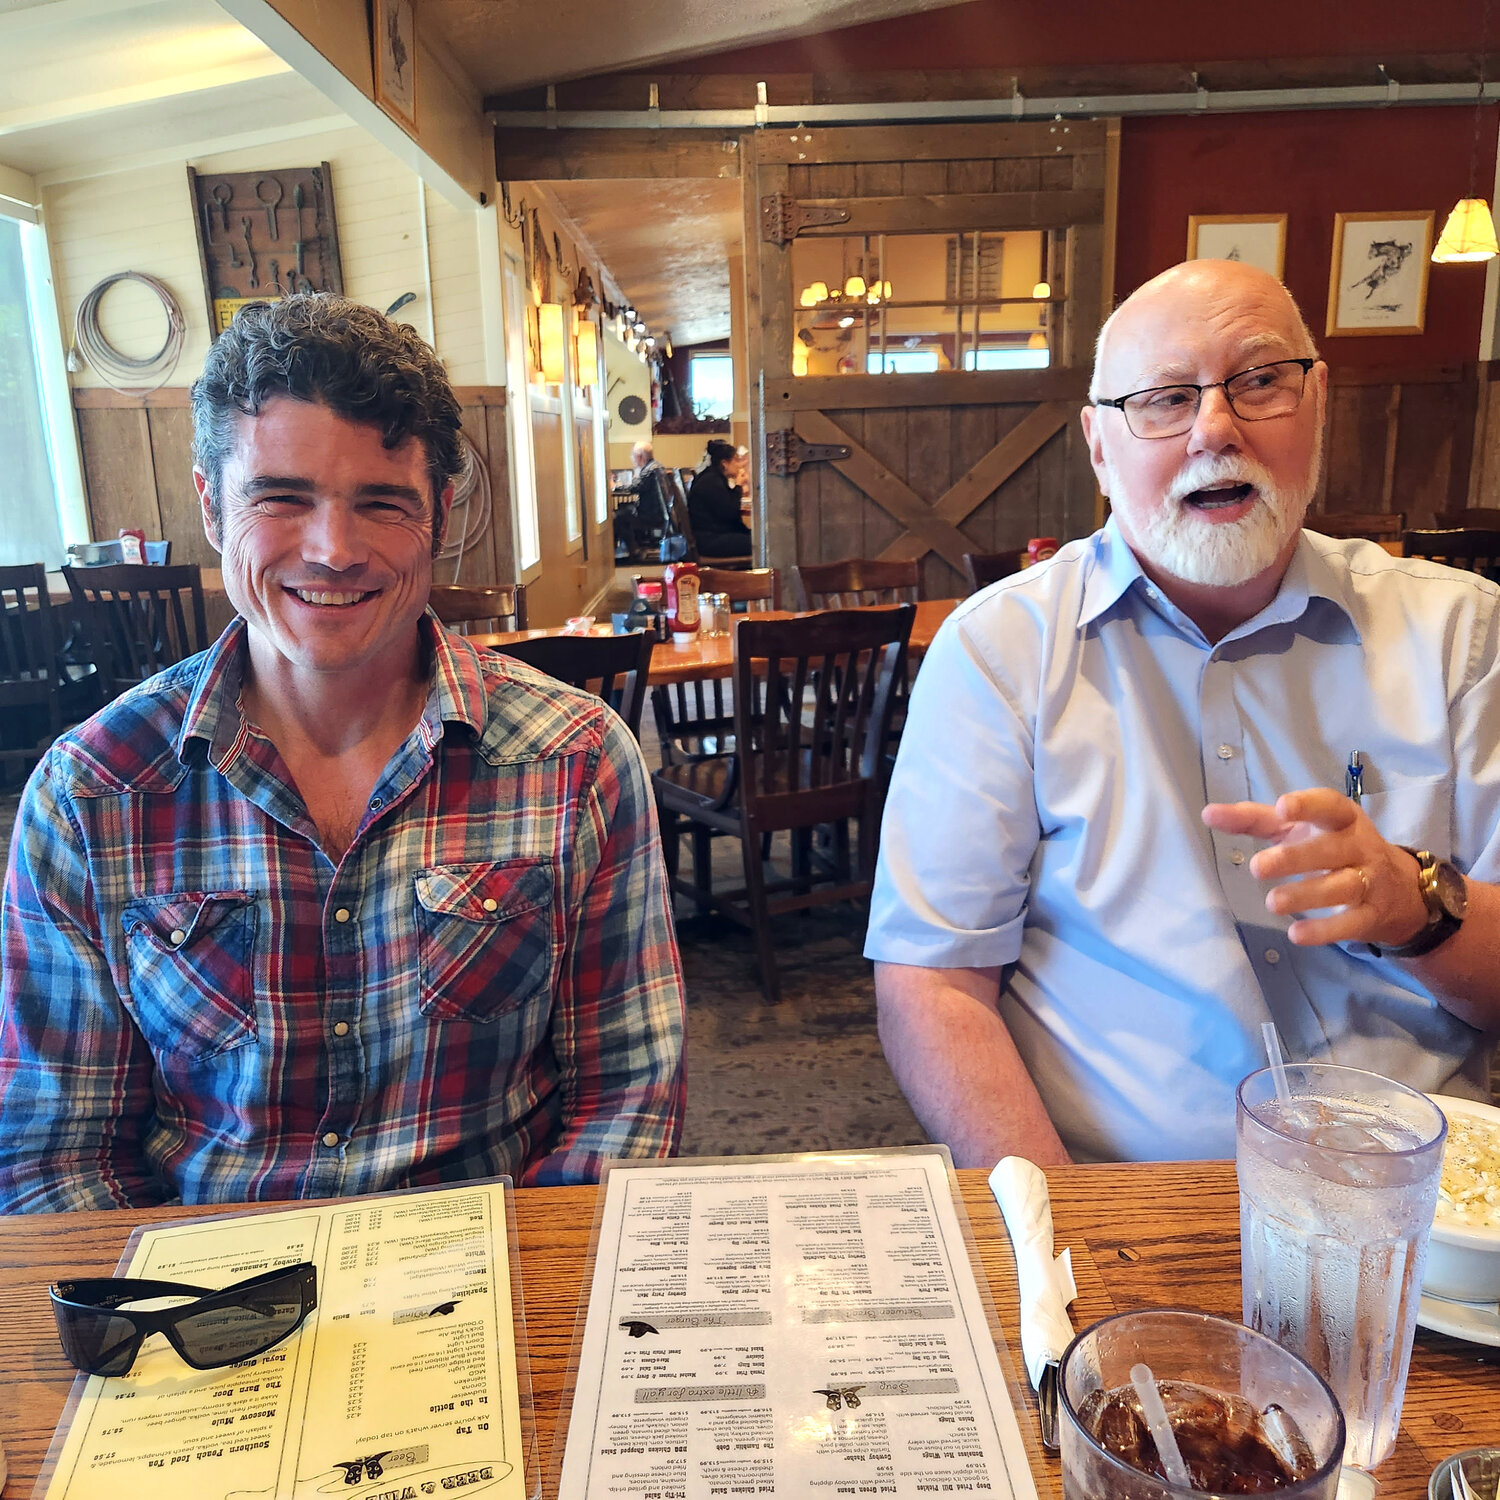 Joe Kent, left, is pictured with Kyle Pratt during an interview with Chronicle columnist Julie McDonald at Ramblin’ Jacks Ribeye in Napavine.